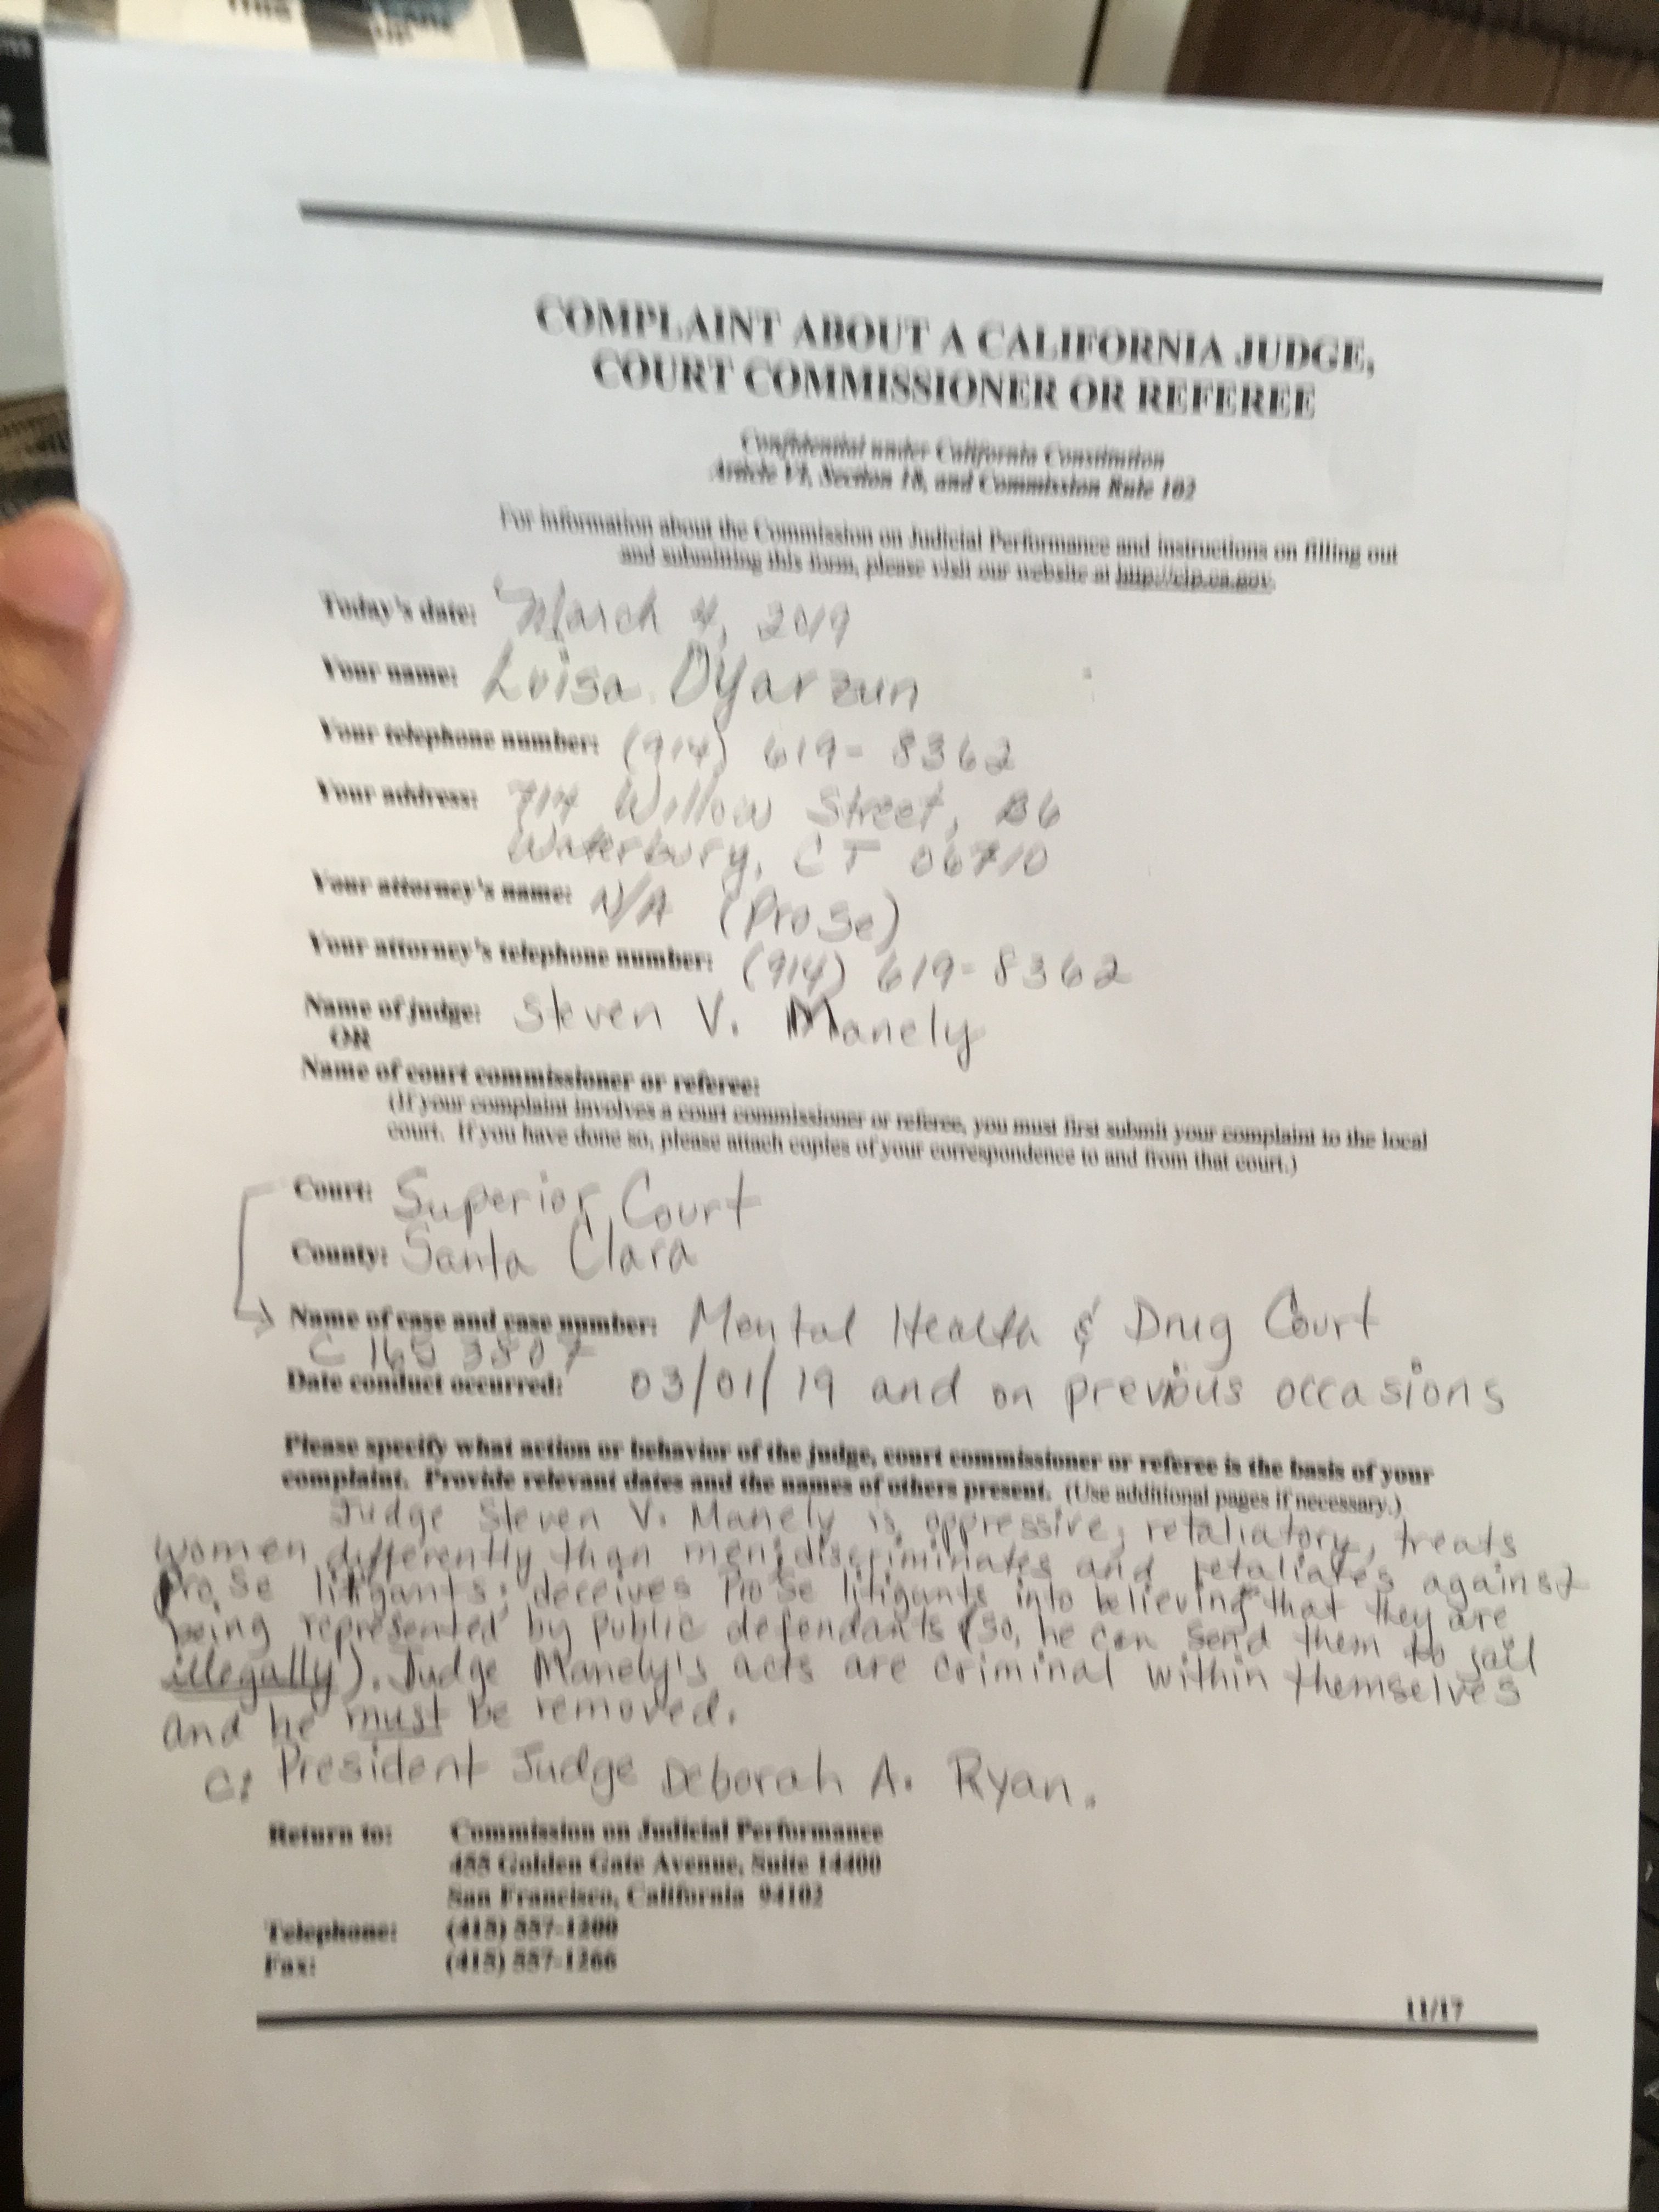 LUISA OYARZUN'S COMPLAINT FORM AGAINST JUDGE MANLEY, ON BEHALF OF TANIA MCCASH A MOTHER OF THREE.JPG